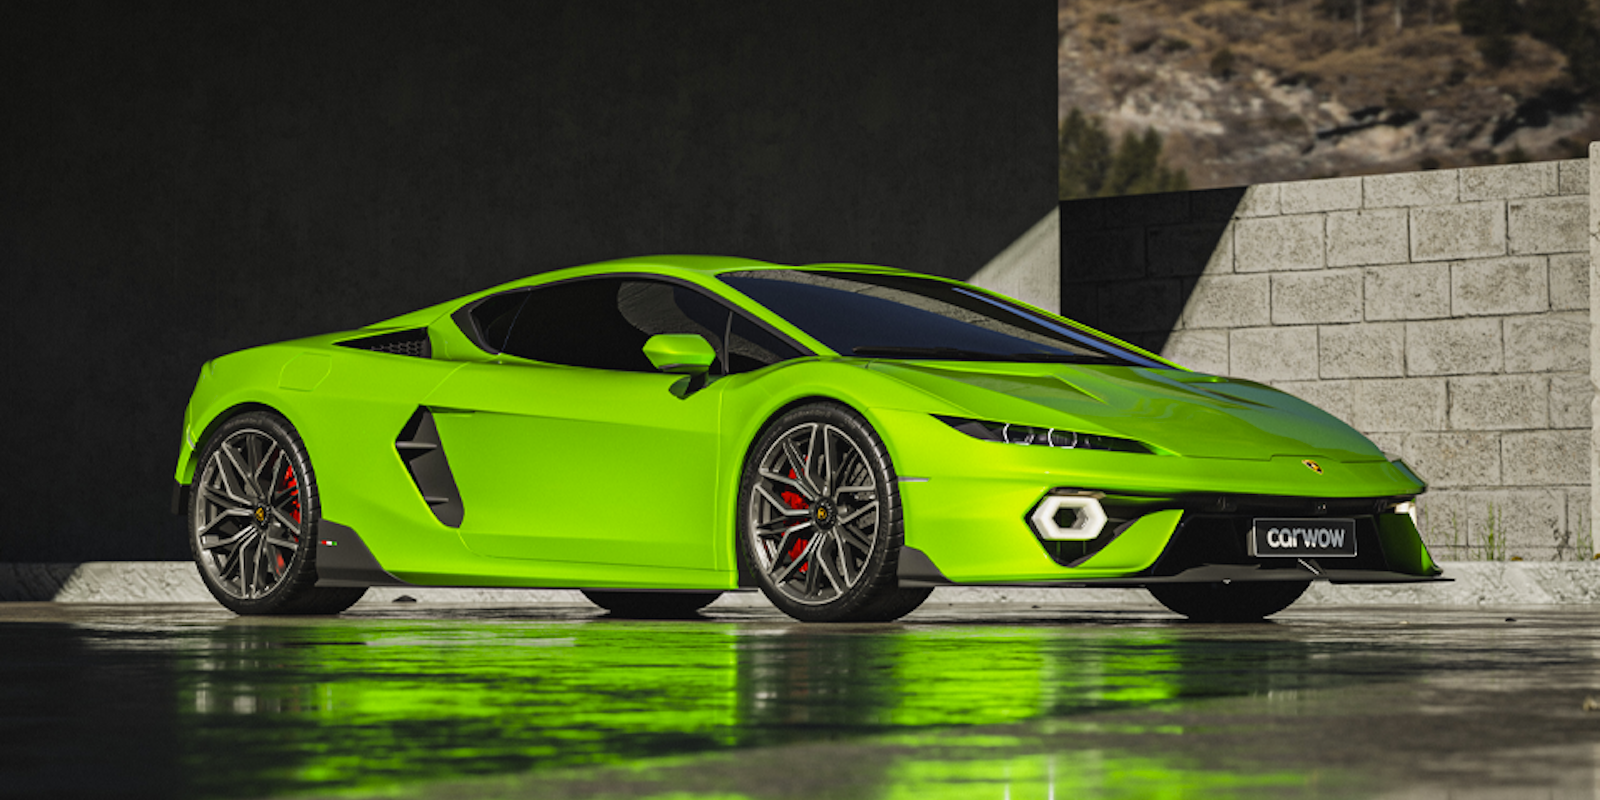 New Lamborghini Huracan replacement: design rendered by carwow | carwow